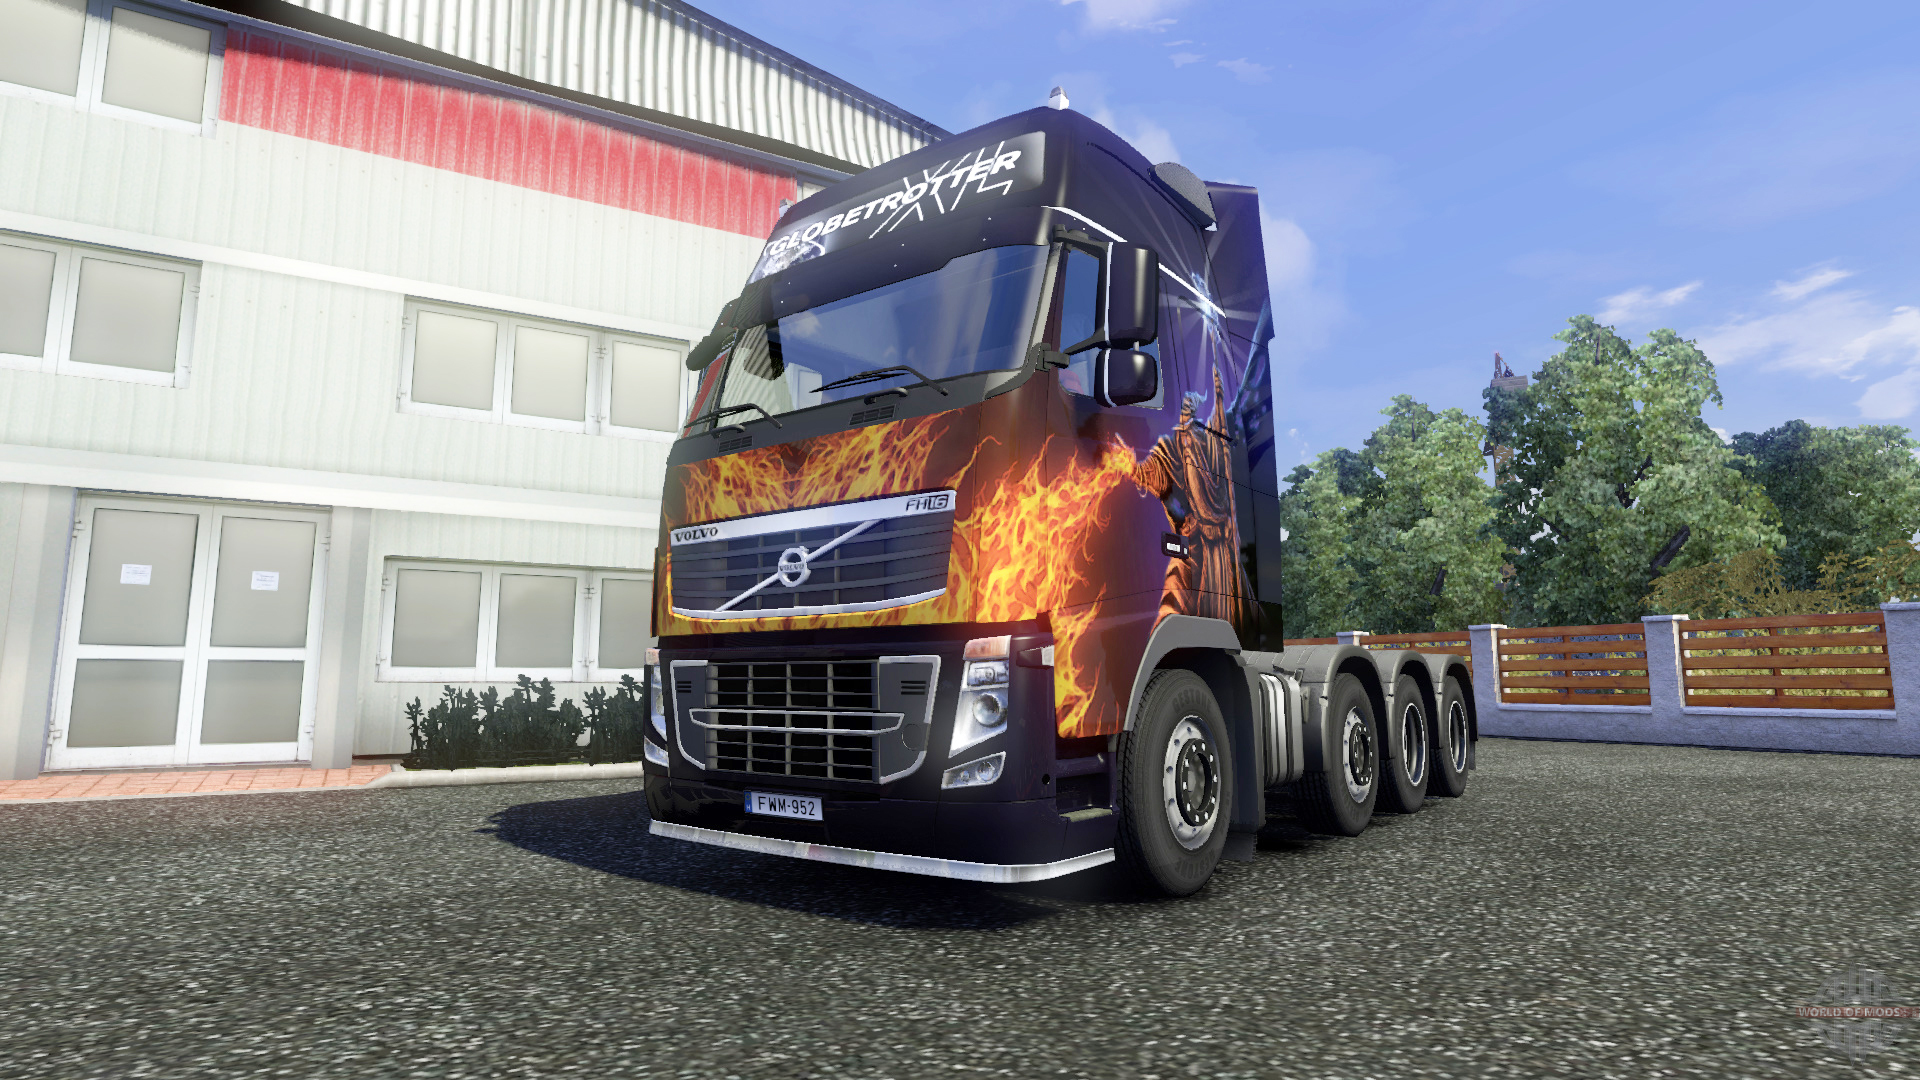 euro truck simulator 2 download free for android